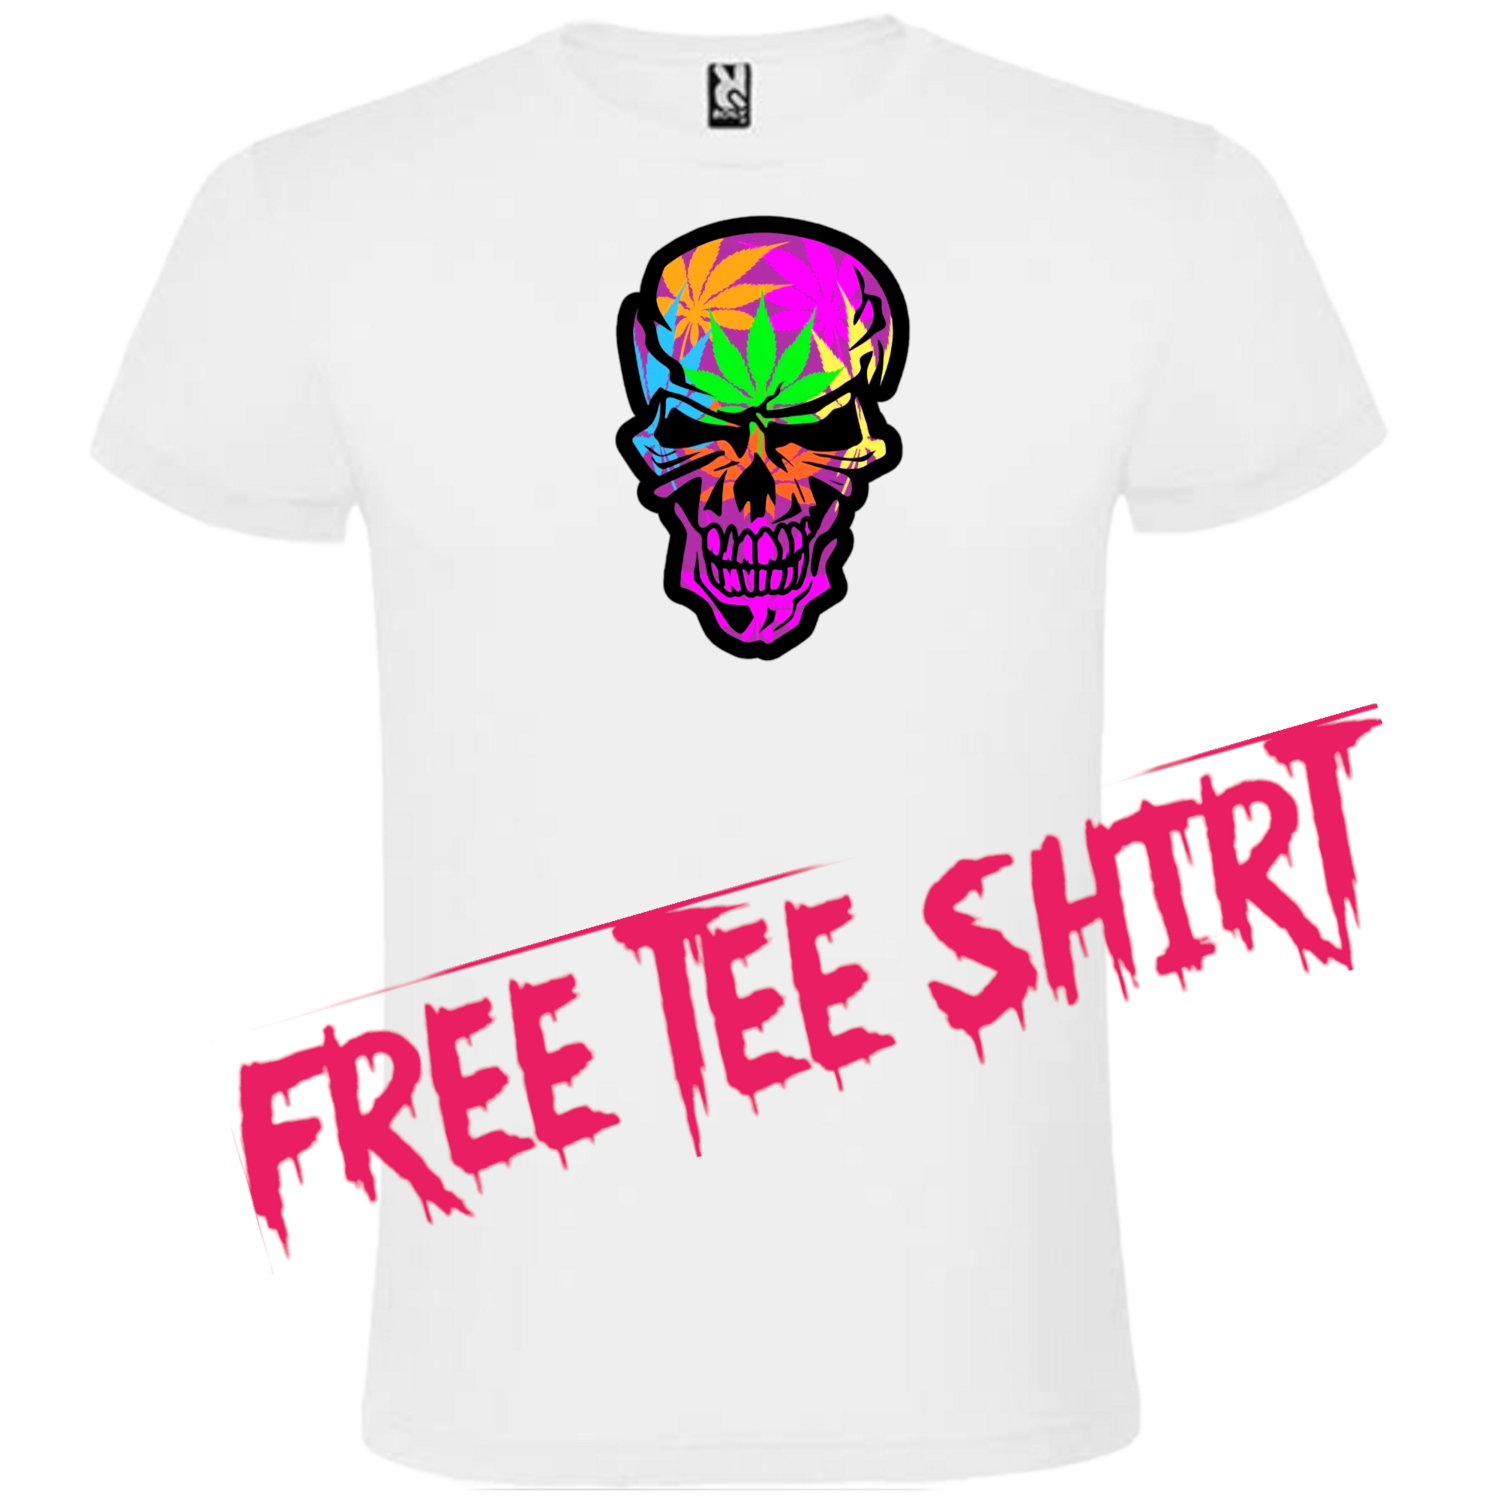 FREE tee.    Skull leaf limited EDITION  
Only small to xl is free anything bigger  is a lil extra